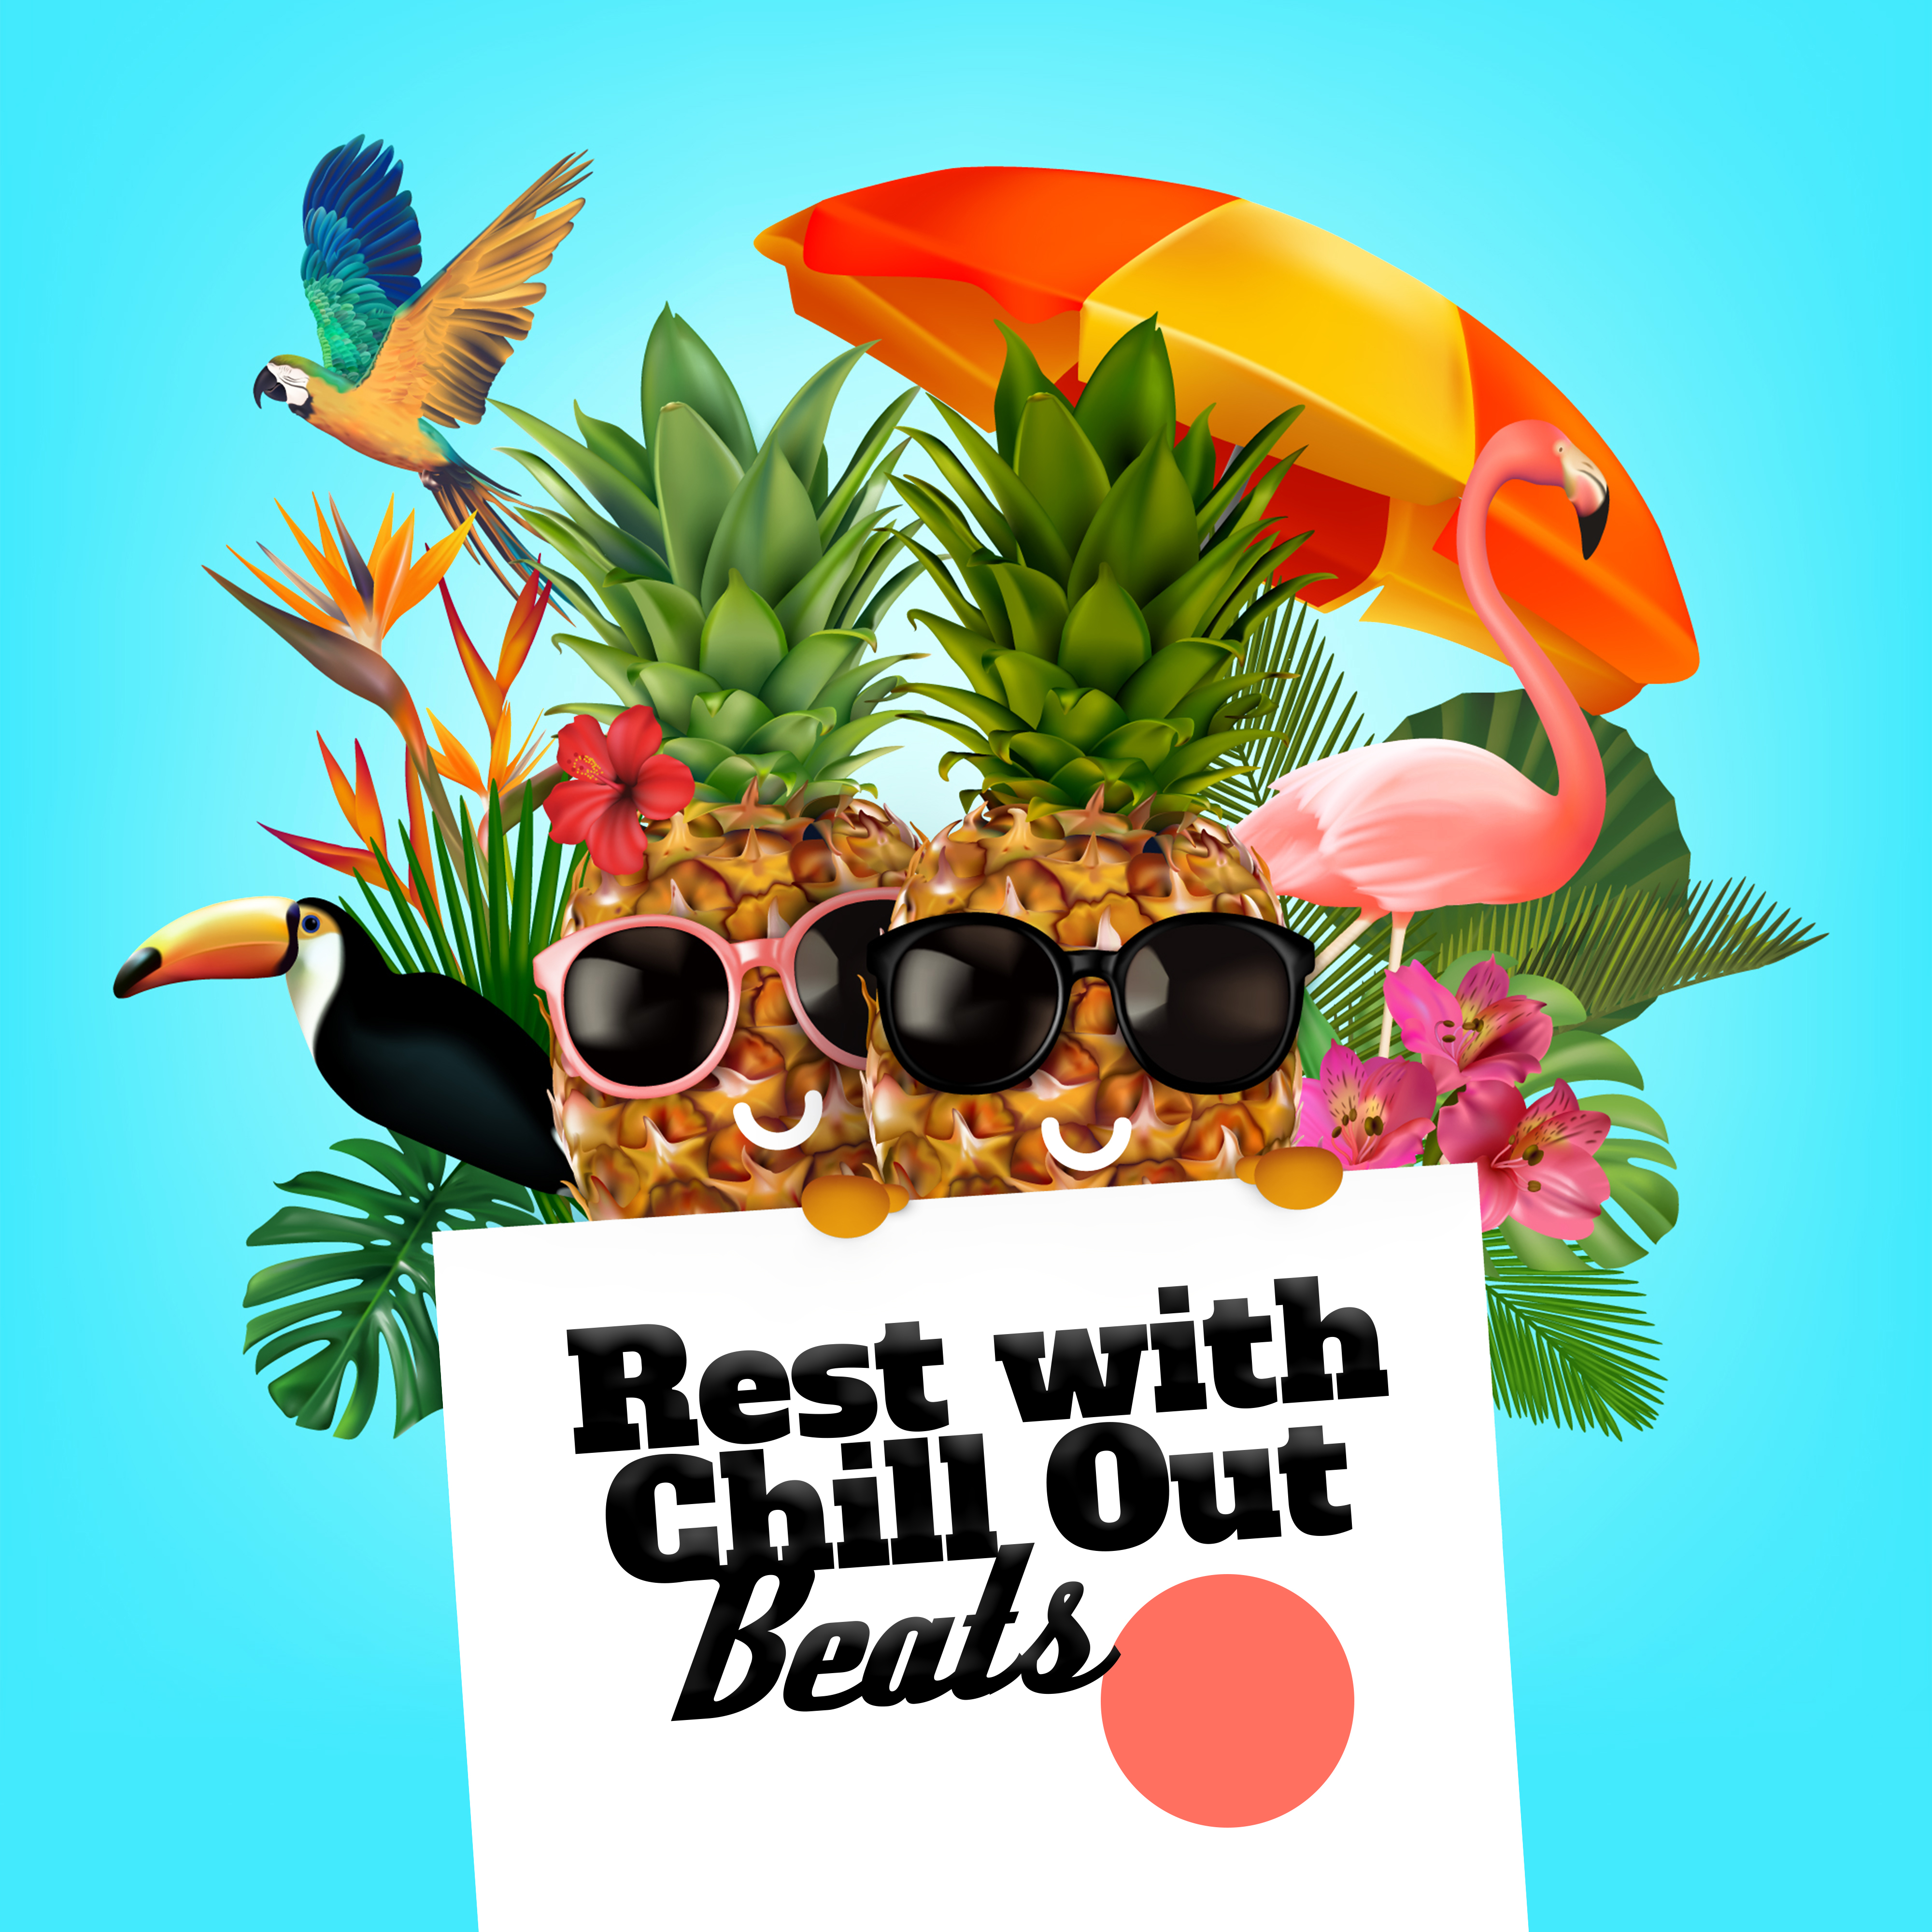 Rest with Chill Out Beats